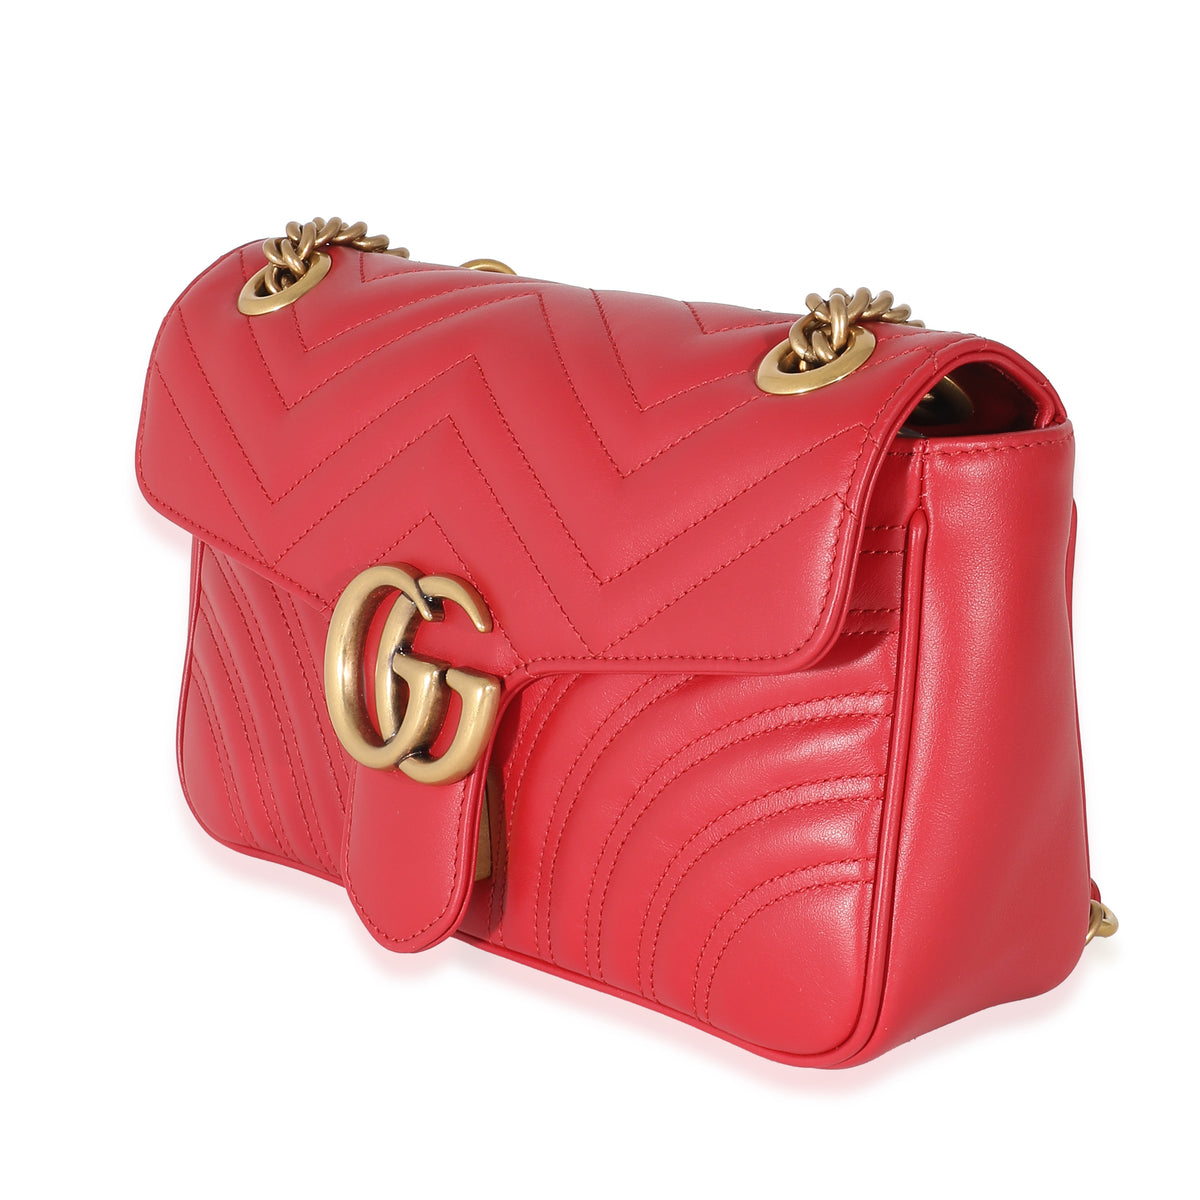 Gucci Red Matelasse Small Marmont Shoulder Bag